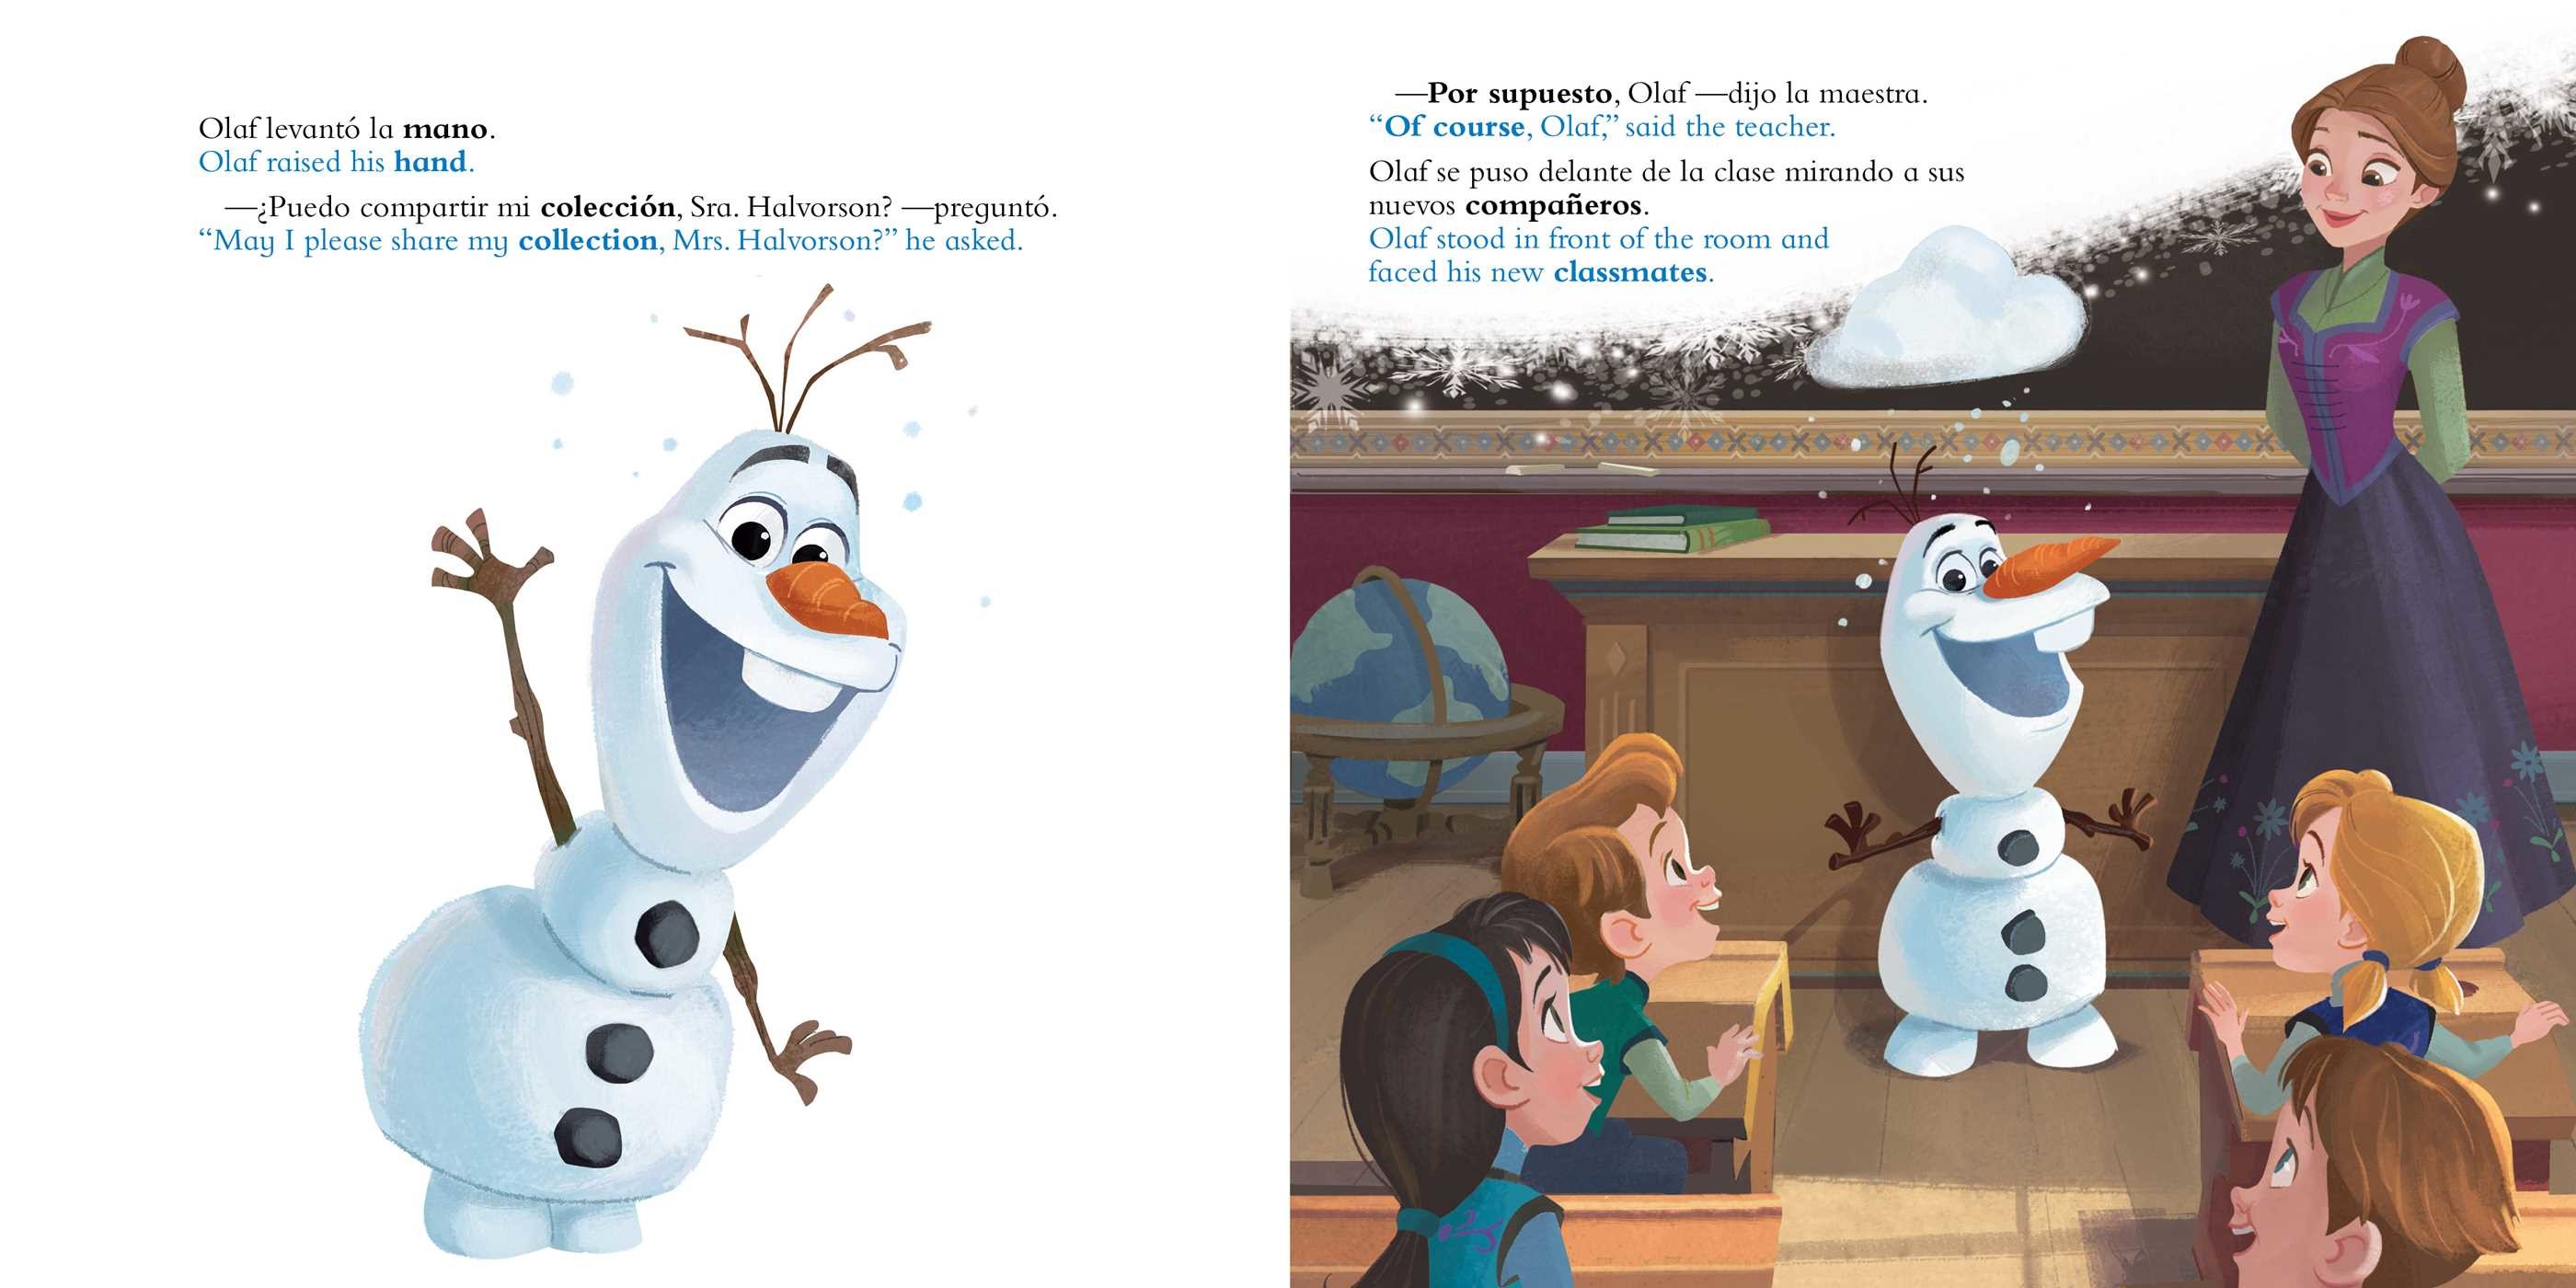 show-and-tell-mostrar-y-contar-english-spanish-disney-olaf-s-frozen-adventure-9781499807981.in02